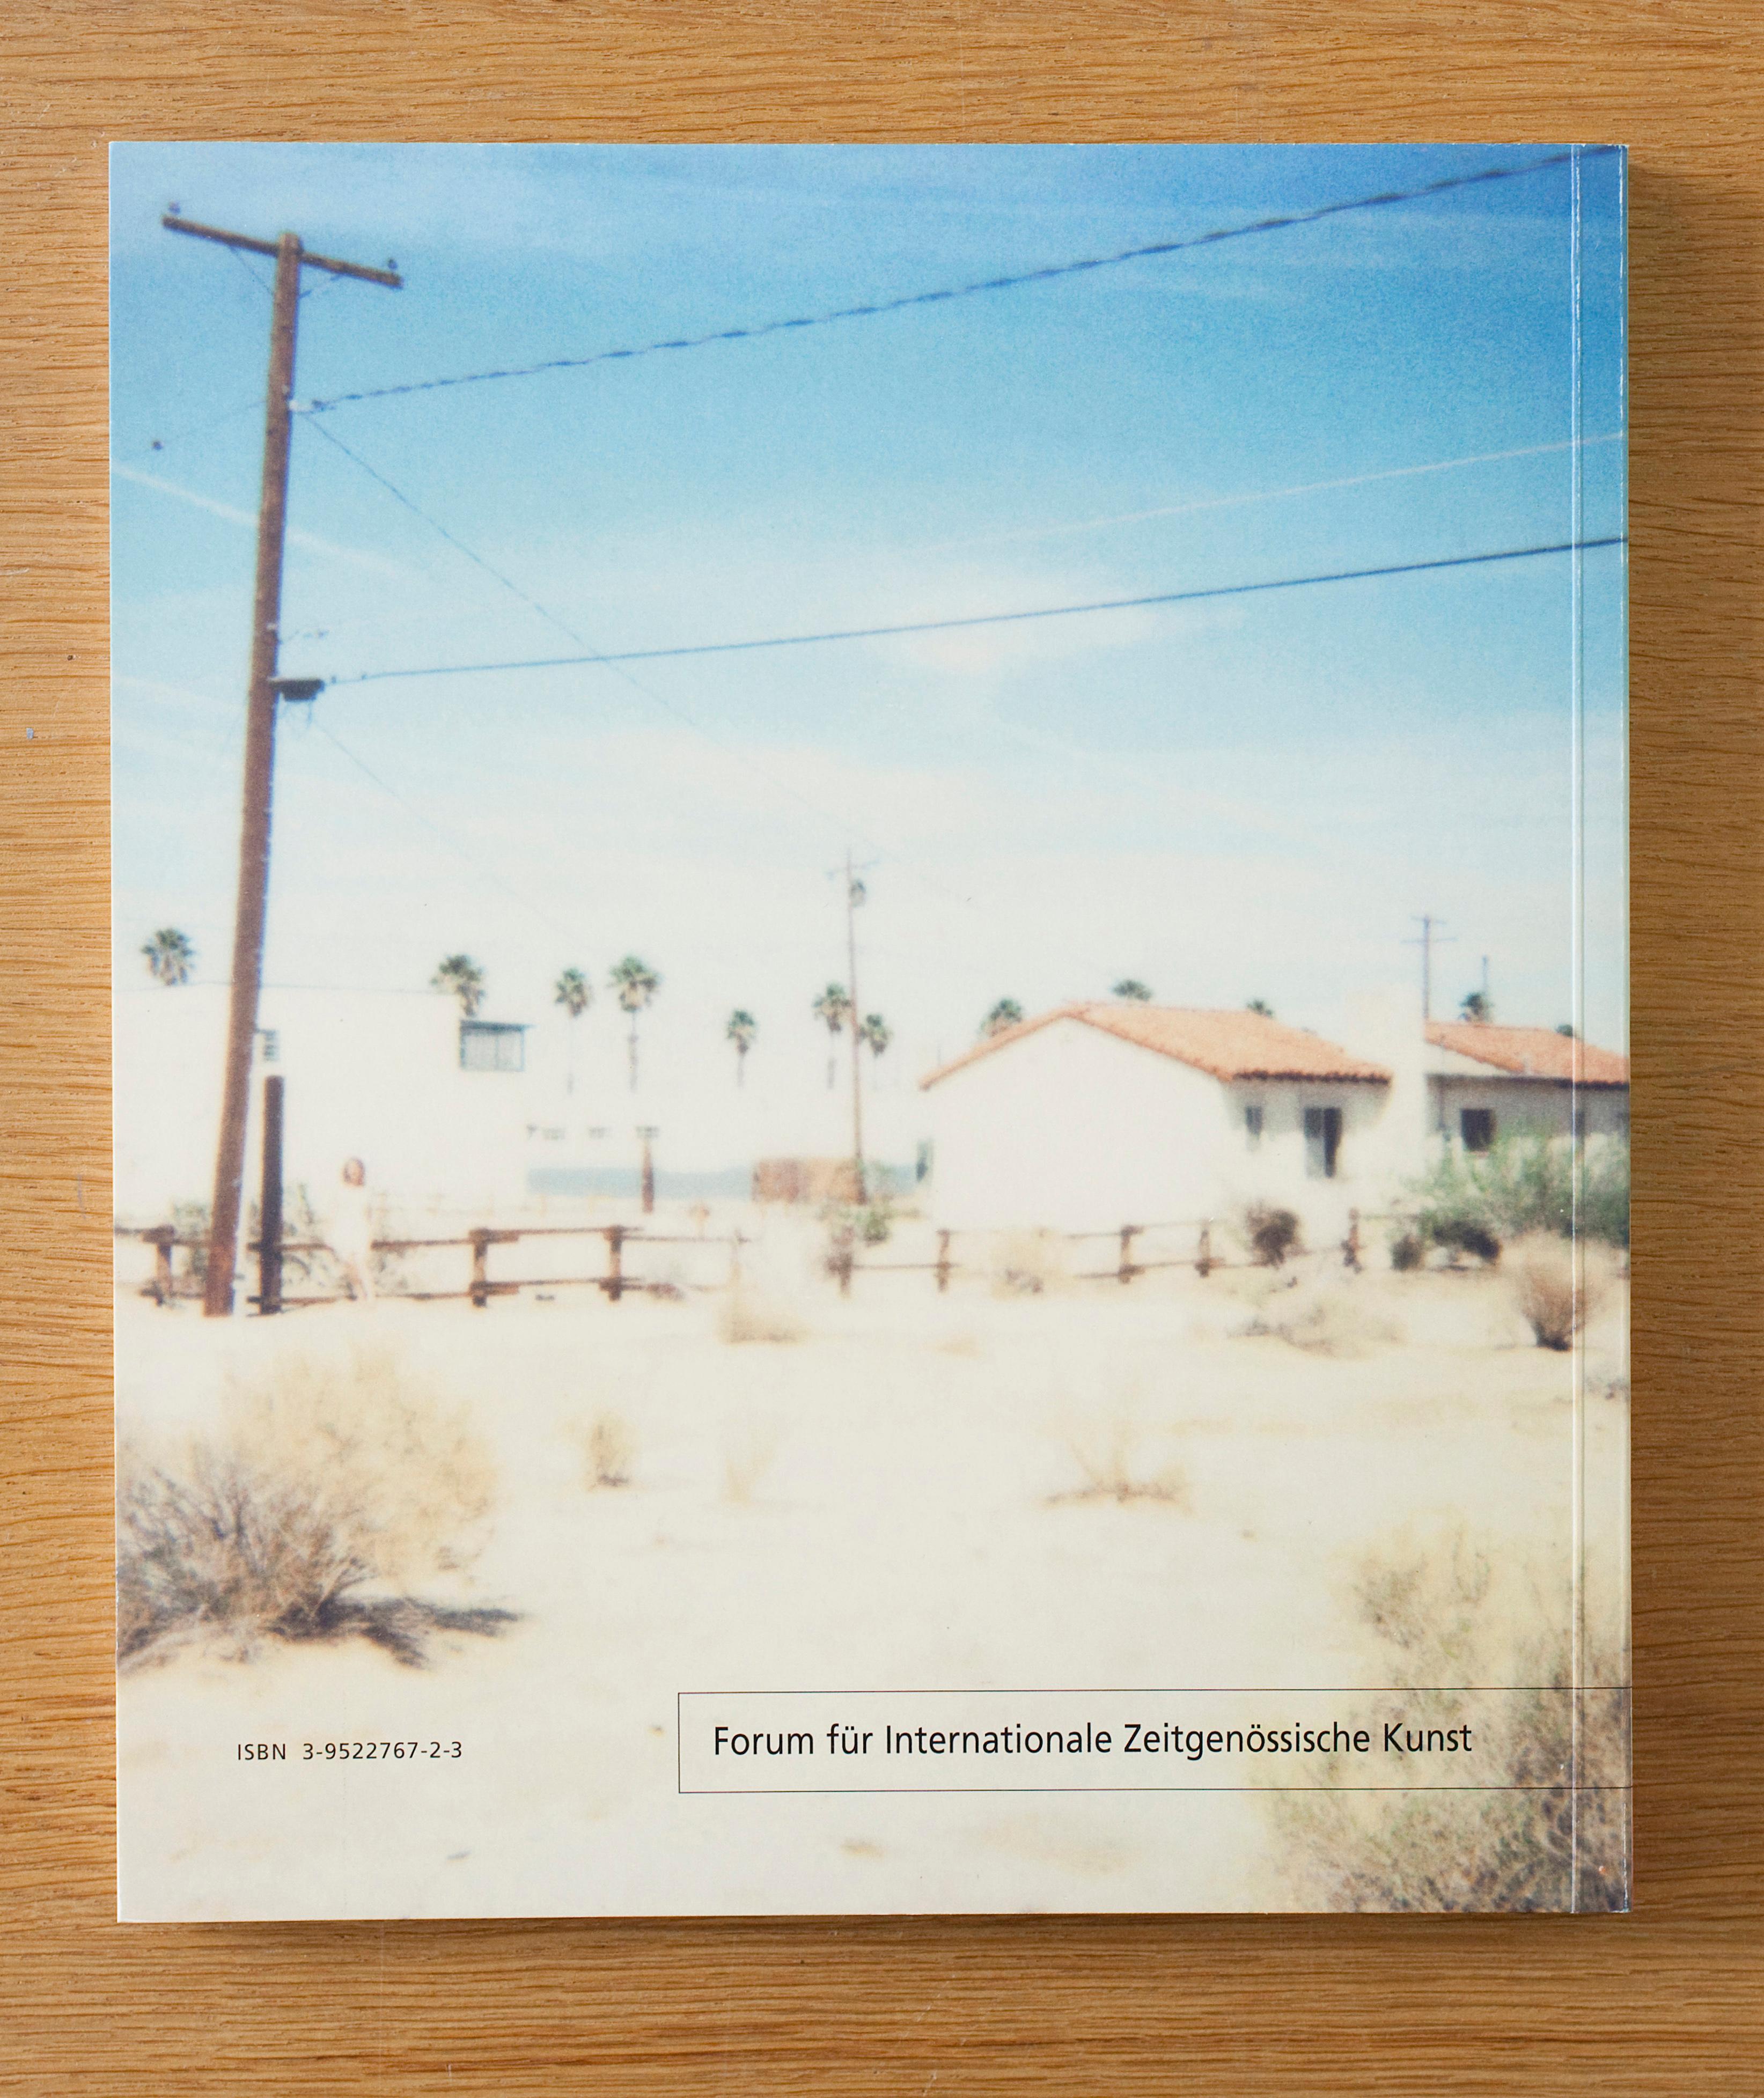 29 Palms, CA - Monograph - signed
Hardcover Edition, each page is a think cardboard page. 
Like a children's book.
published by Galerie Kaempf, Basel, 2004
Edition 400
ISBN 3-9522757-2-3

This is Stefanie Schneider's first monograph and only very